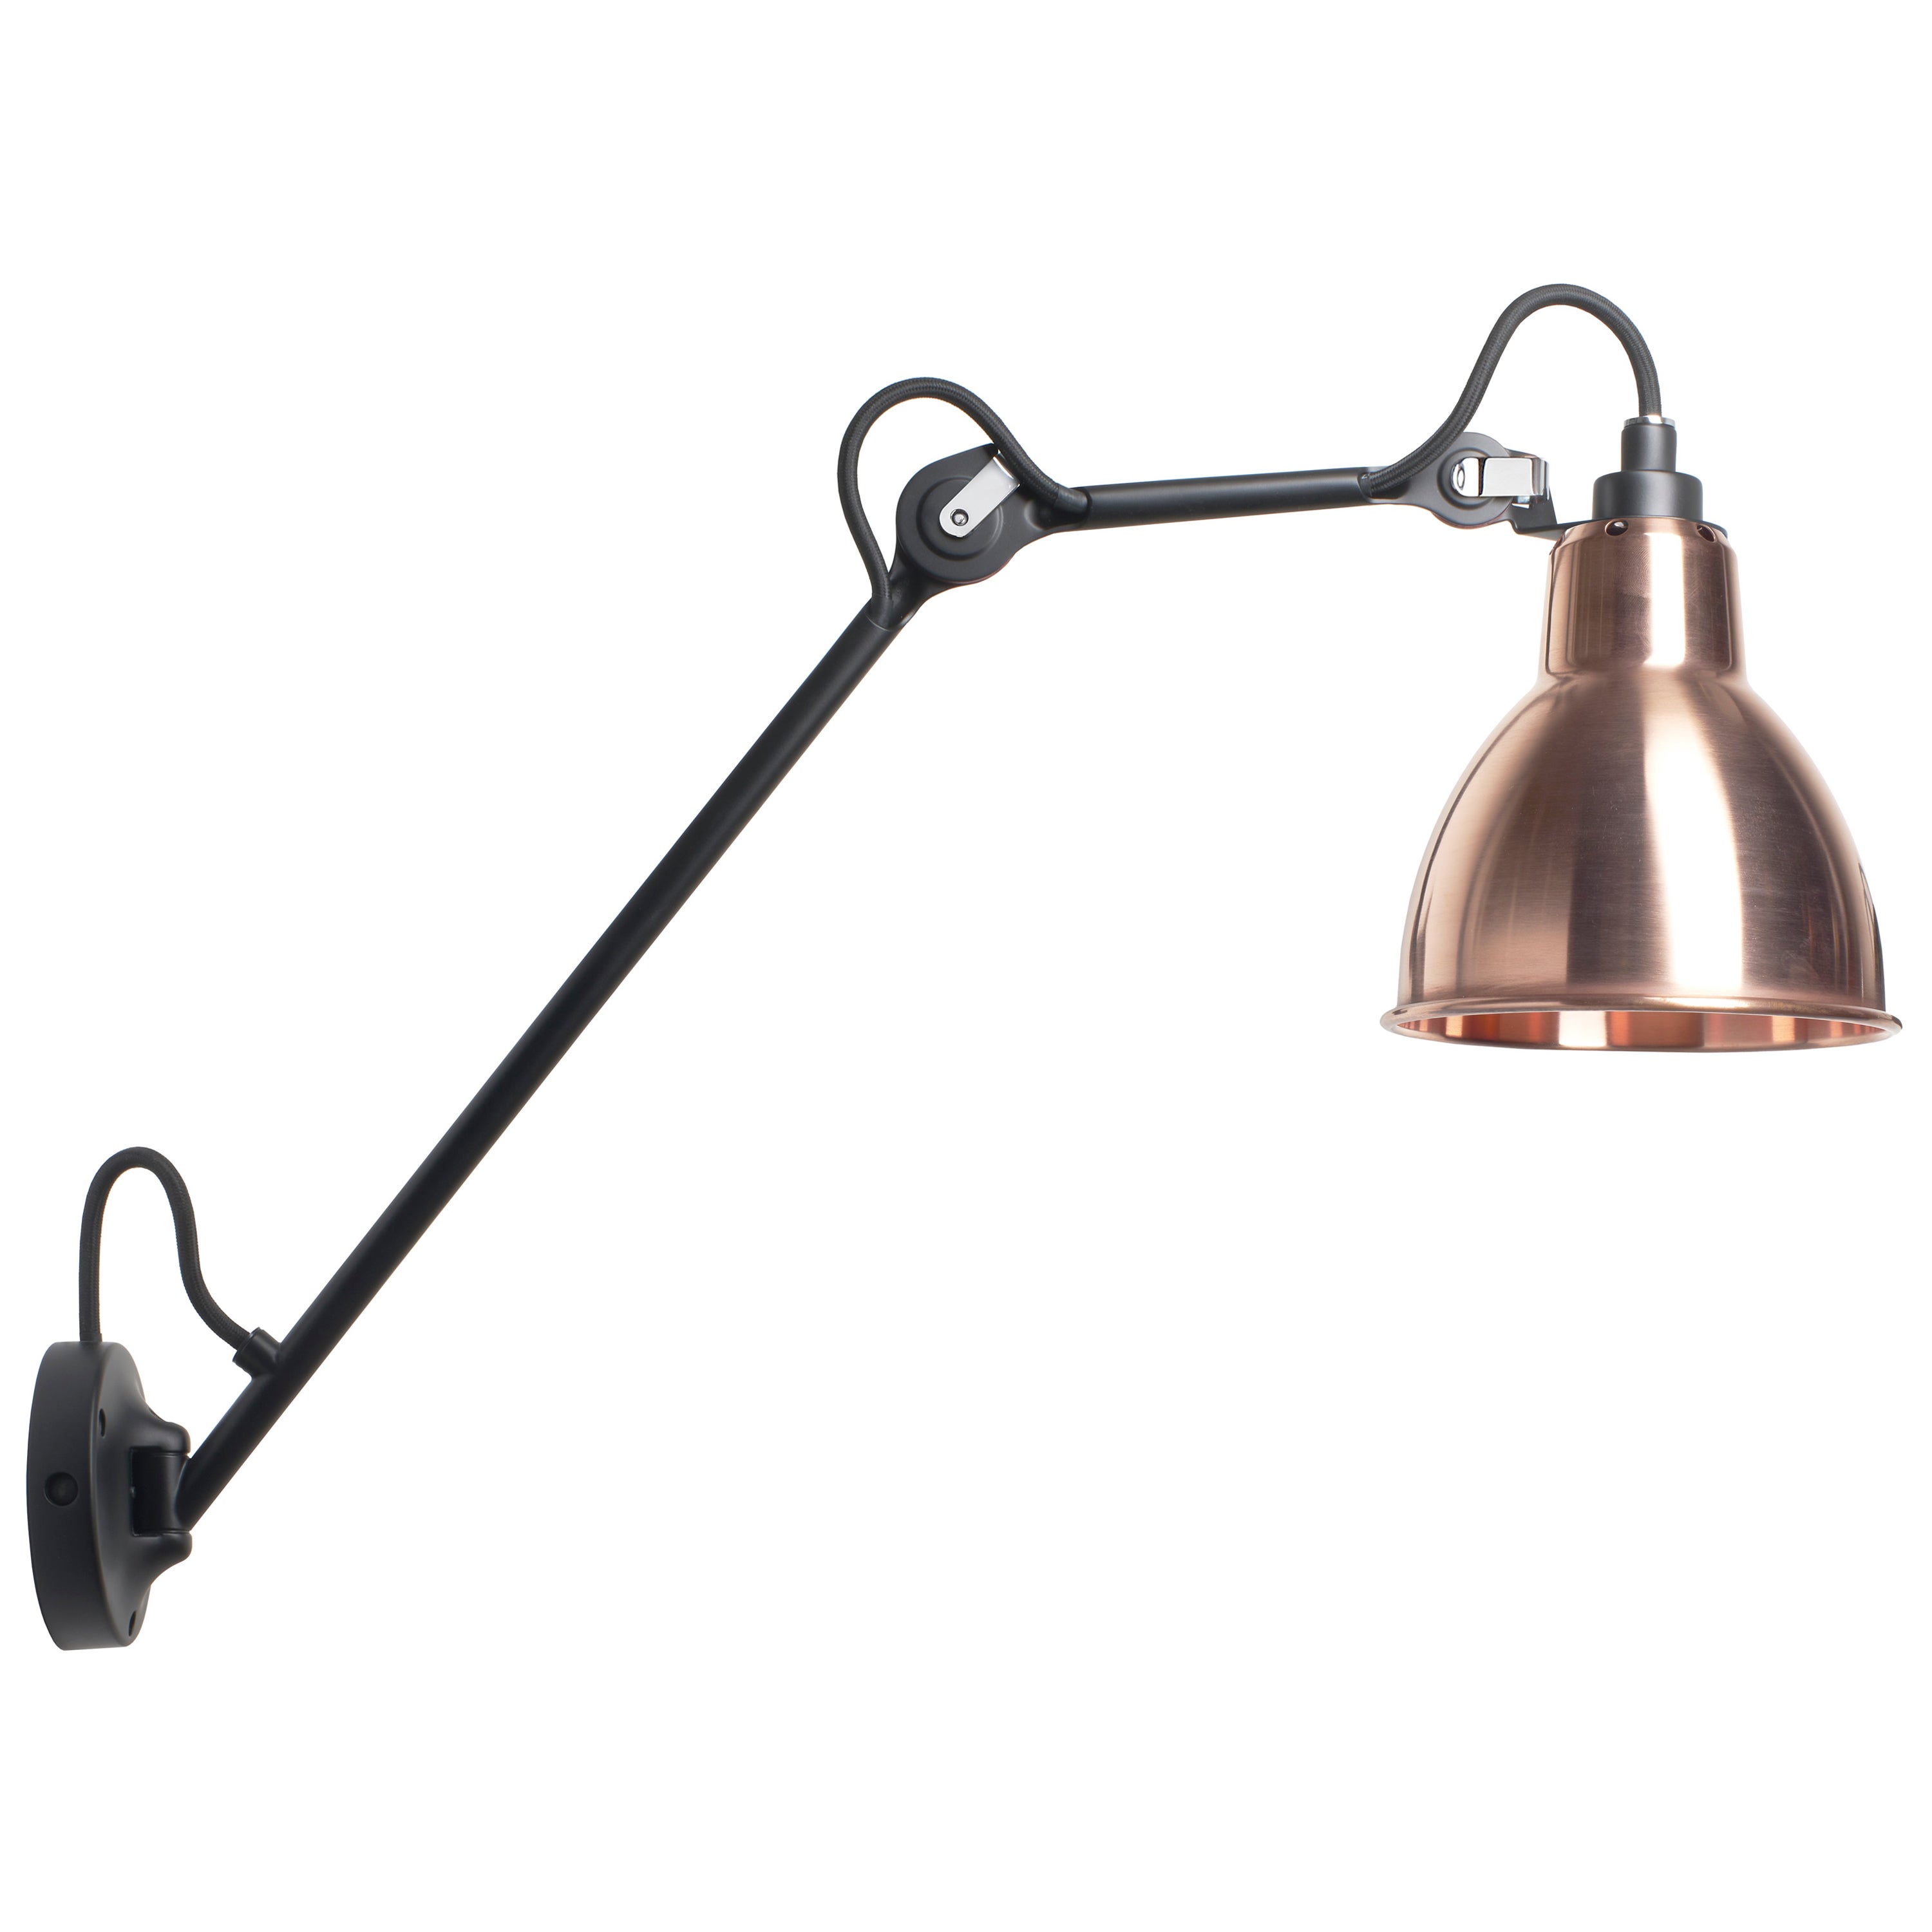 DCW Editions La Lampe Gras N°122 Wall Lamp in Black Arm and Raw Copper Shade